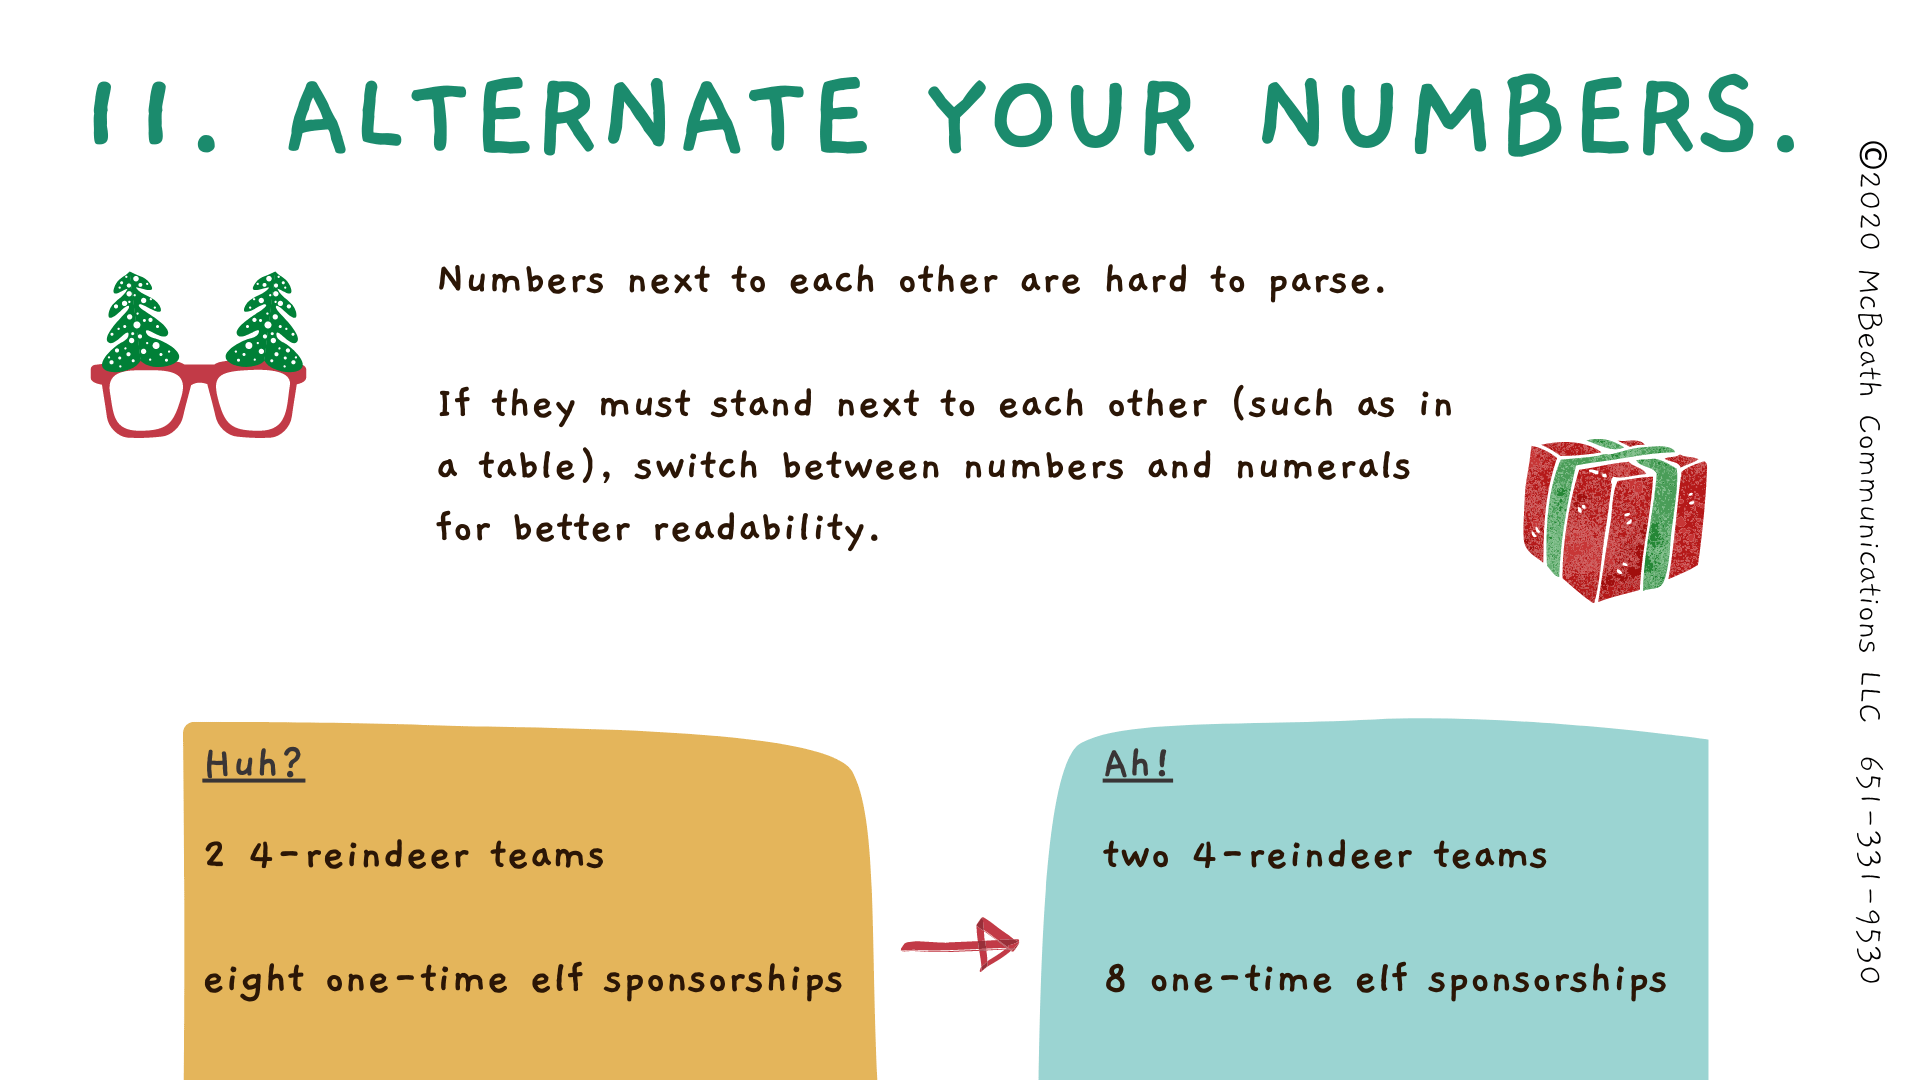 Alternate your numbers.